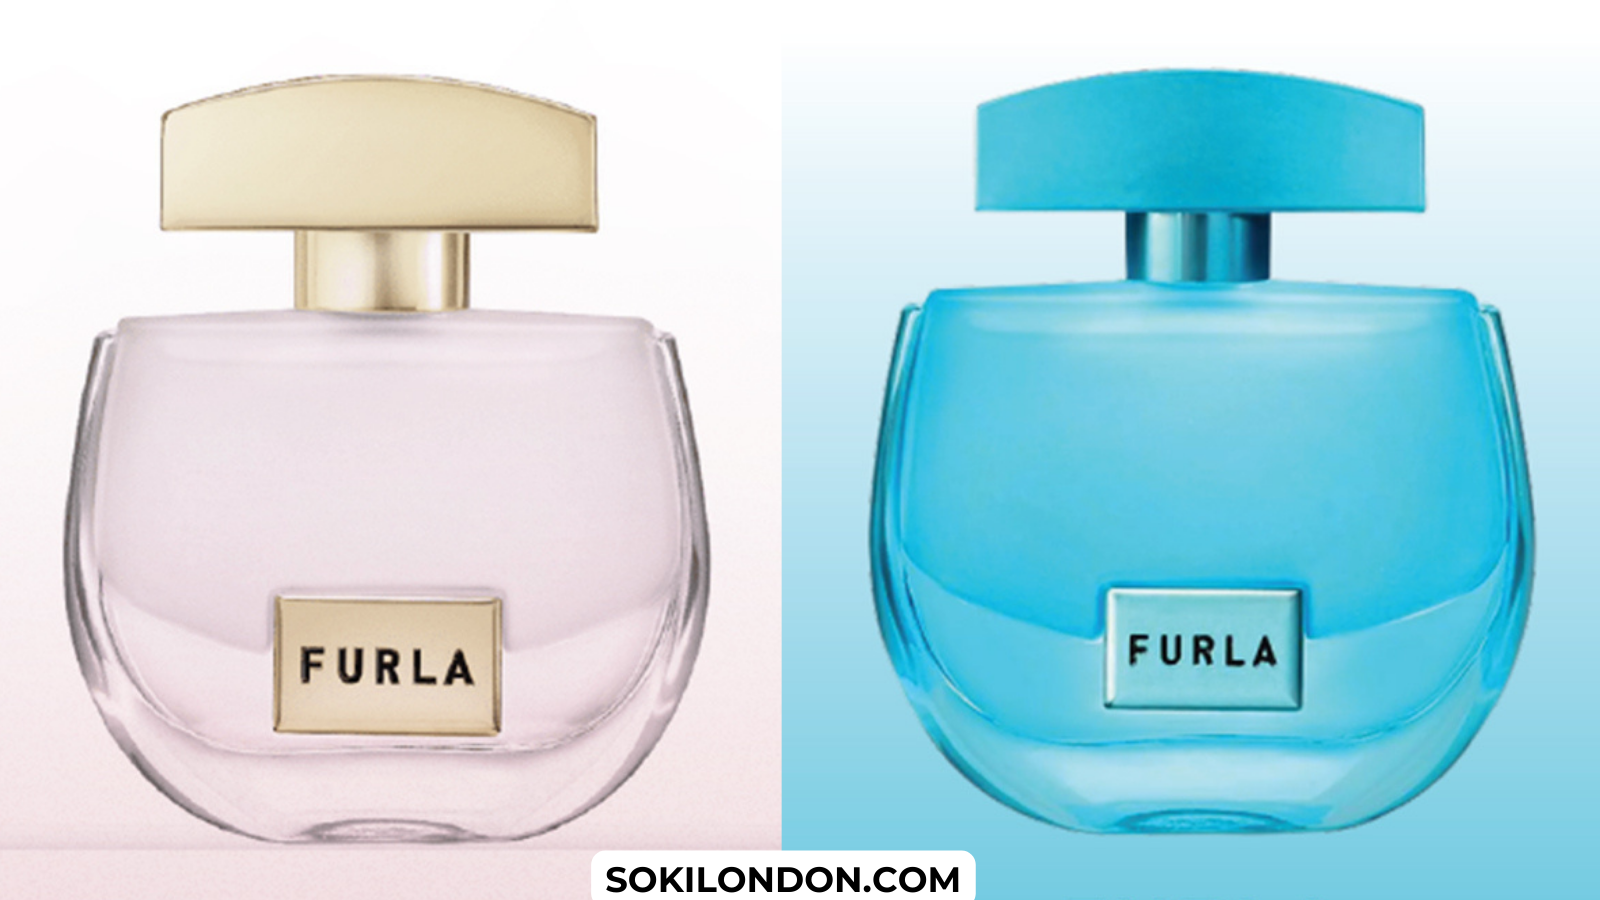 The Ultimate Guide To The Furla Fragrances